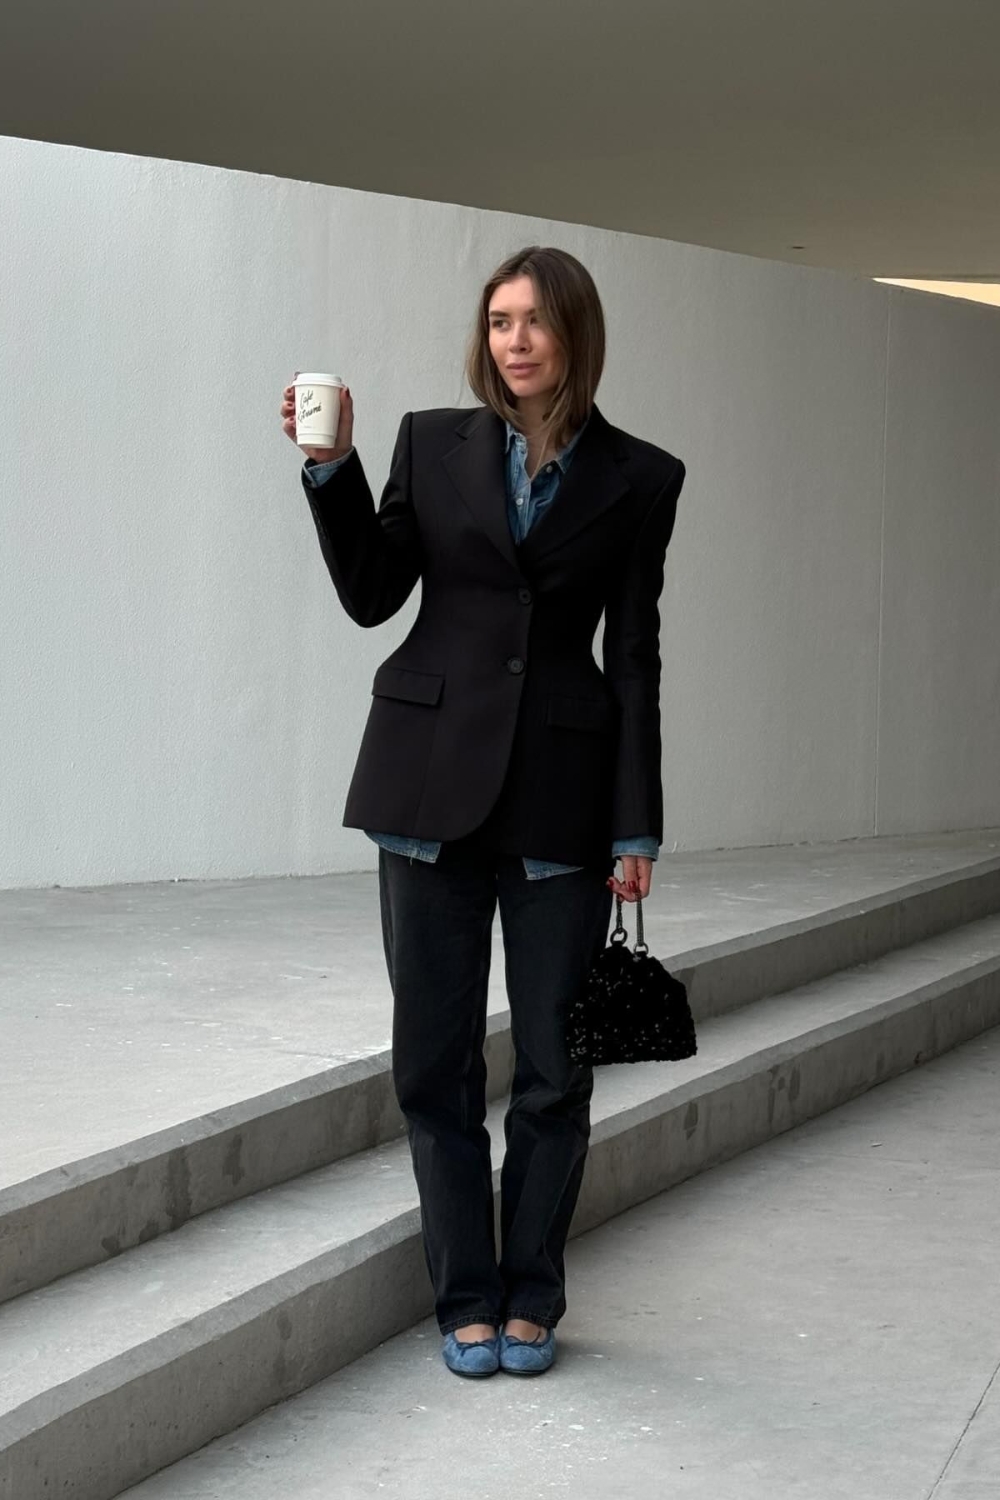 Black blazer with jeans and denim shirt outfit for work